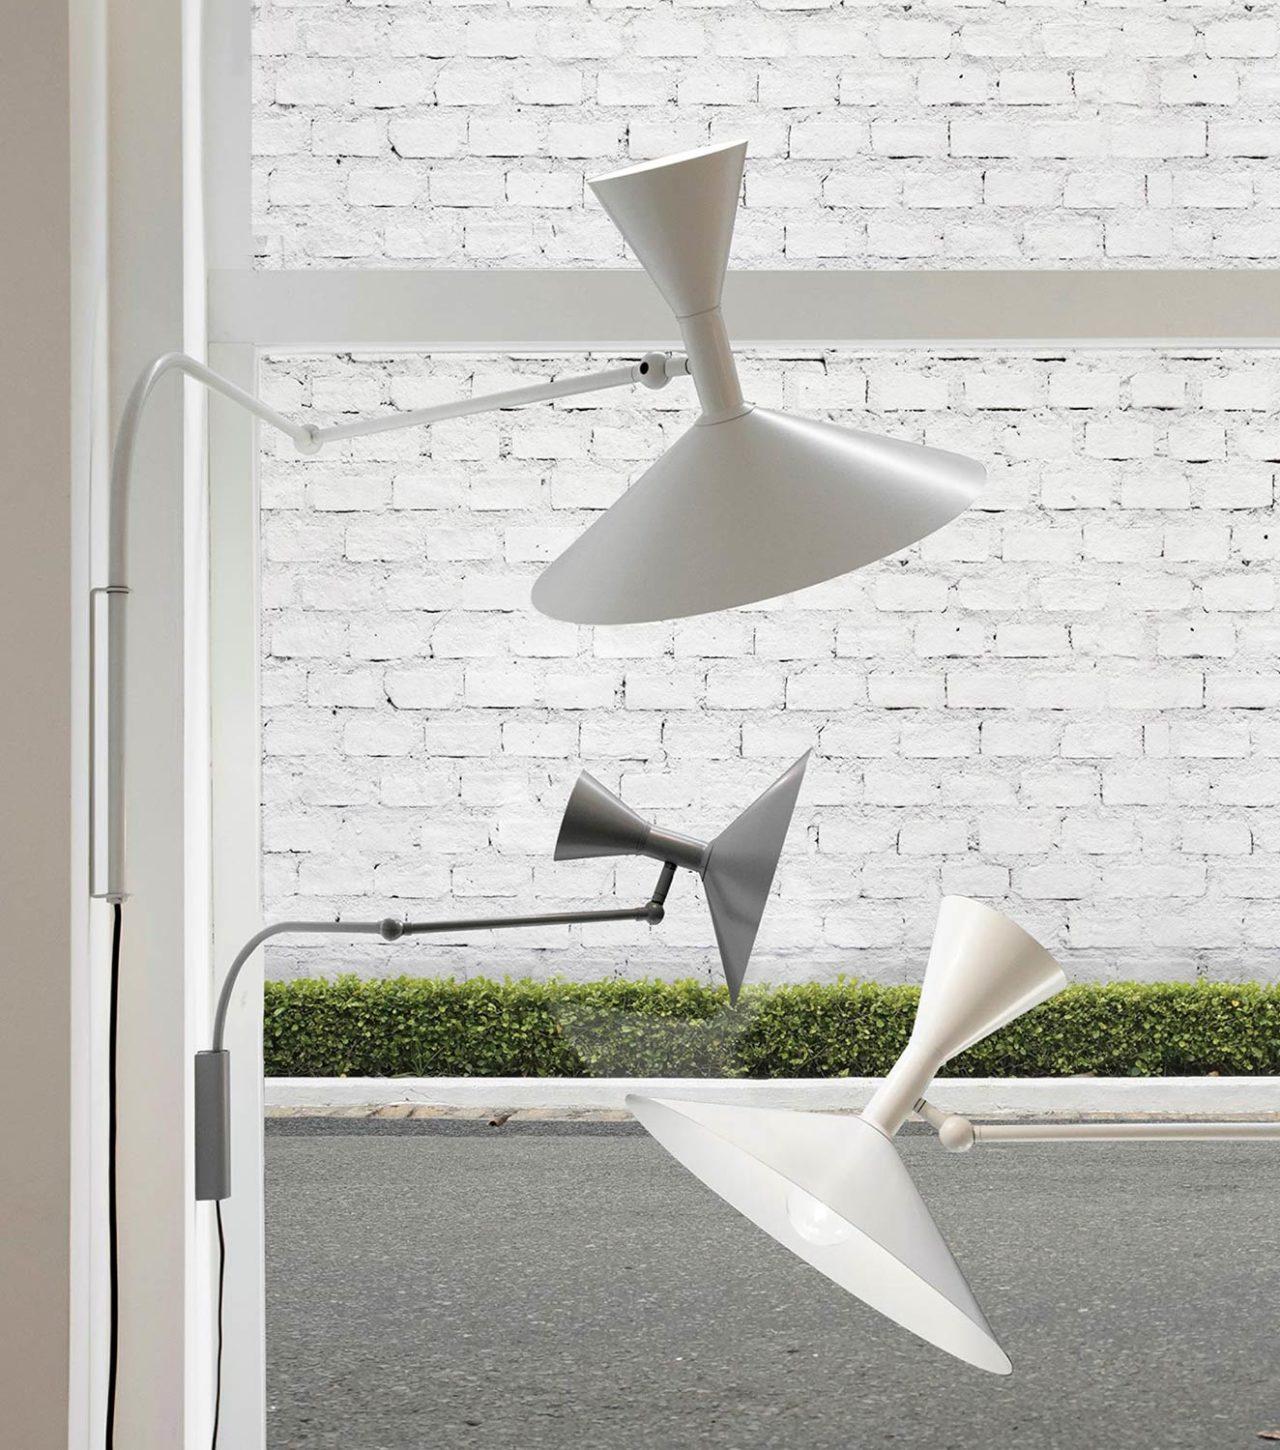 Small Le Corbusier 'Lampe de Marseille Mini' wall lamp for Nemo in white.

Designed by Le Corbusier for the Unité d’Habitation of Marseille in 1949/1952, this wall lamp is both architectural and functional, with two adjustable joints on the arm and